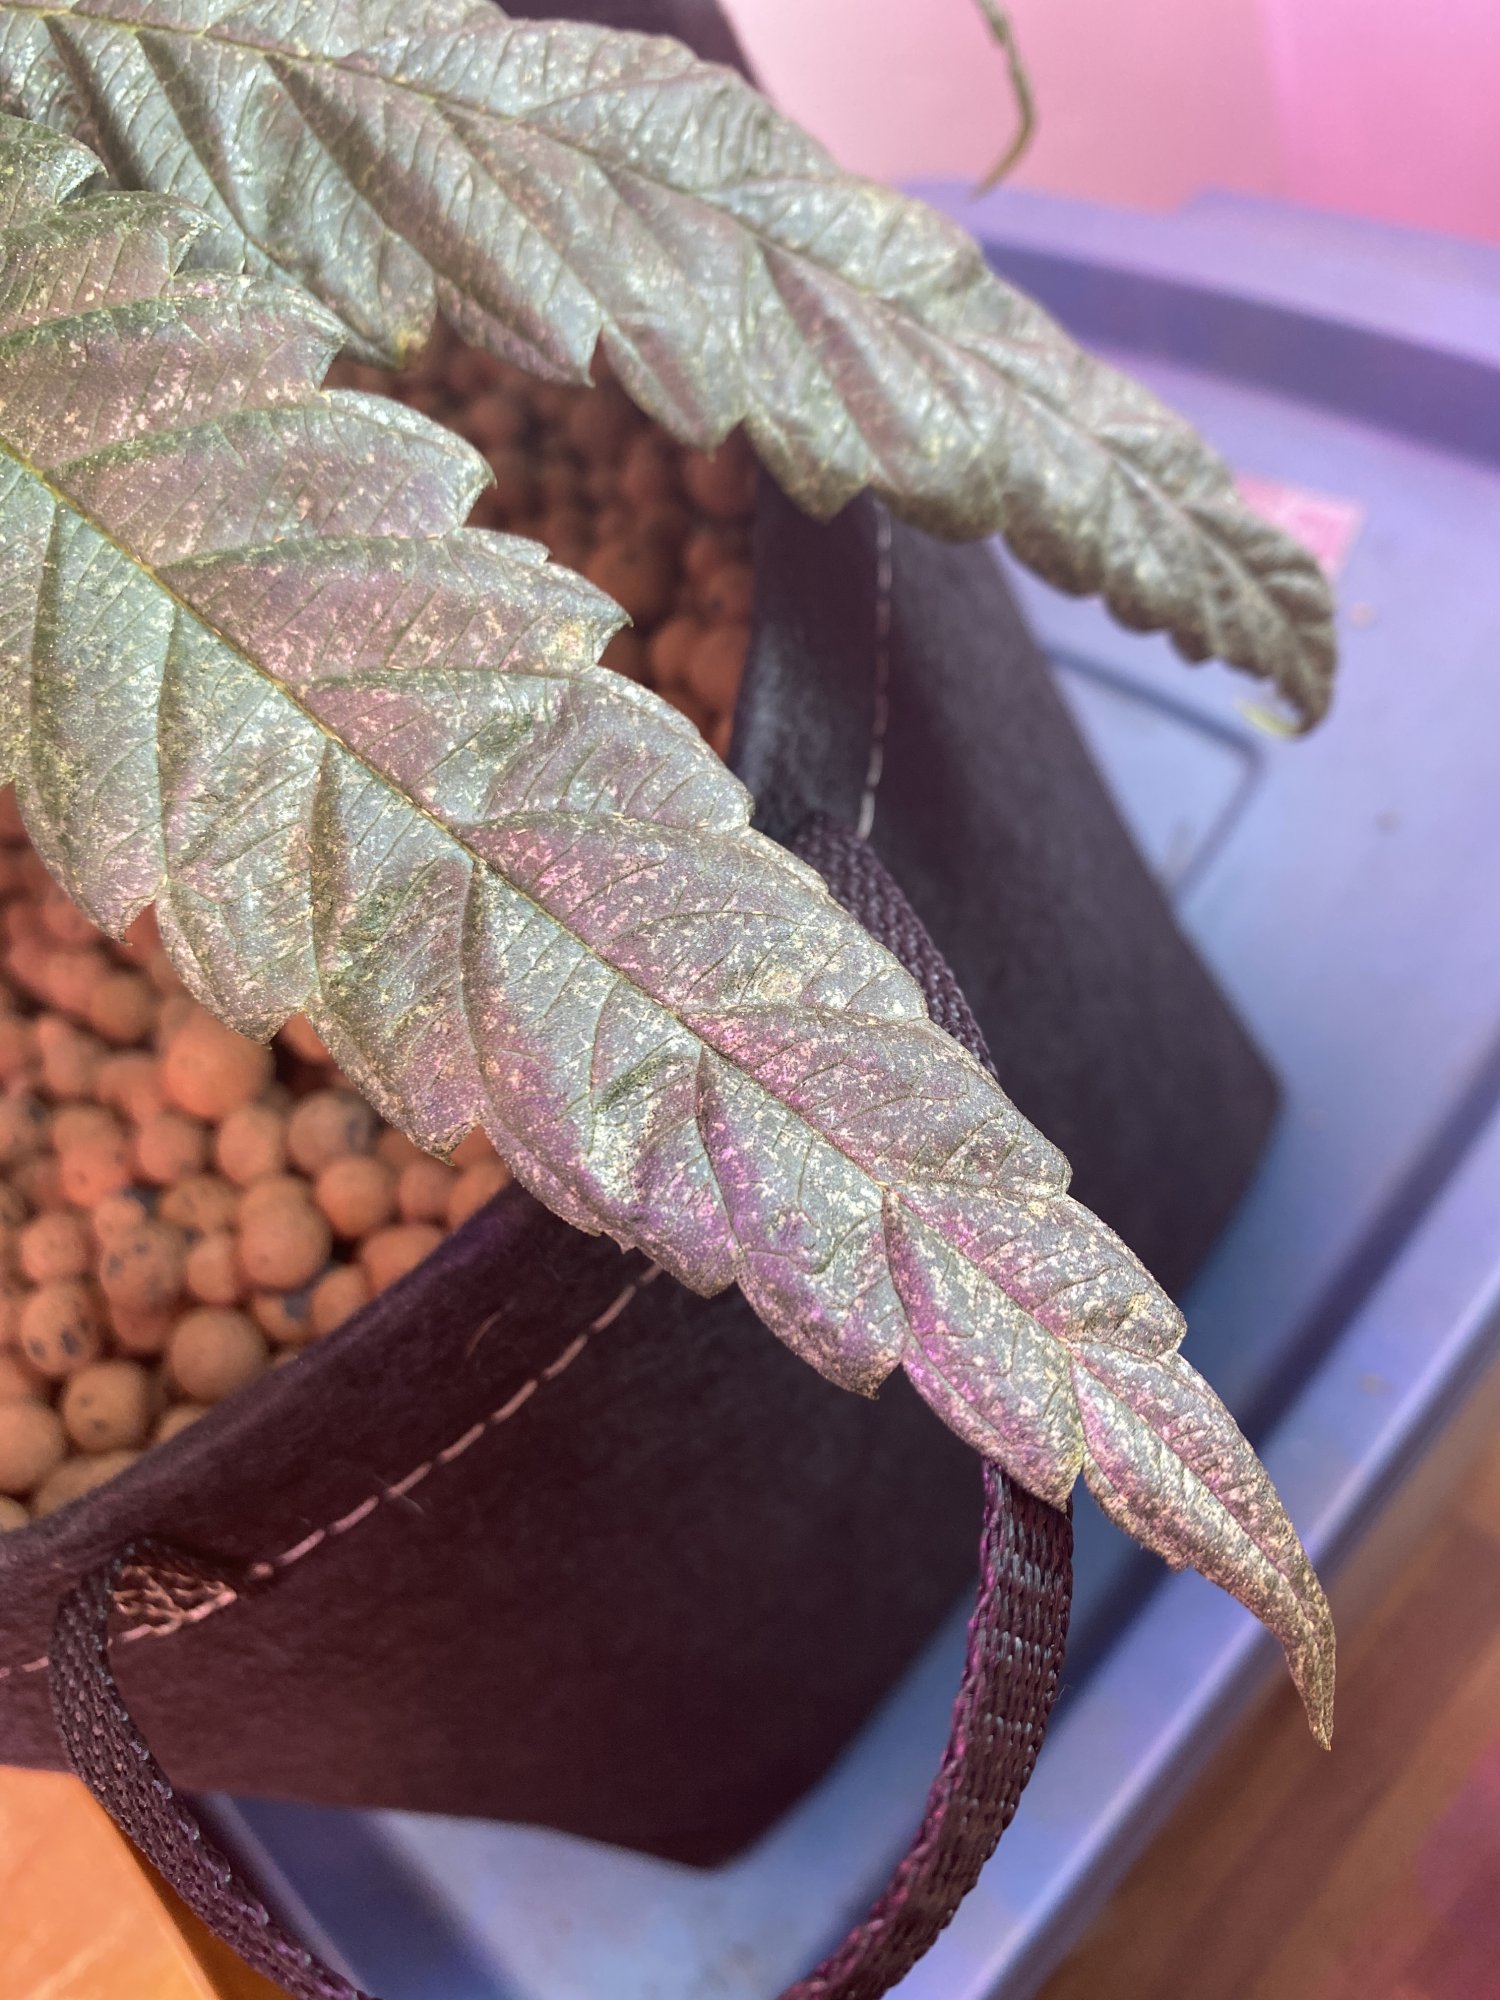 Possible deficiency but from what only on lower fan leaves